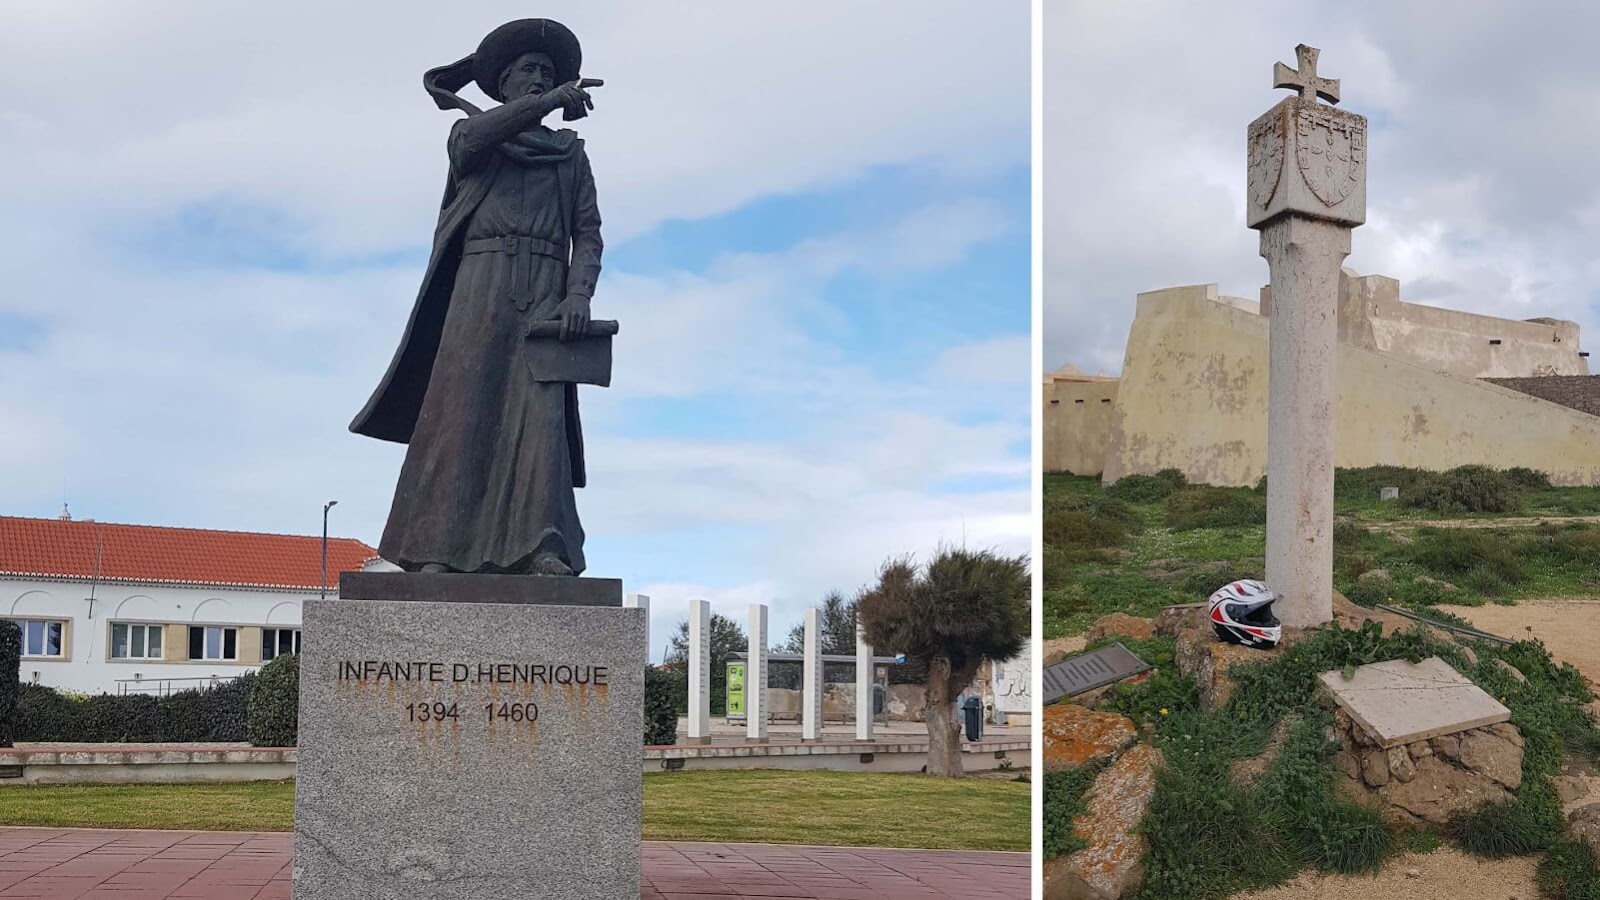 The statue of Infante D. Henrique and the Sagres Fortress - Standard